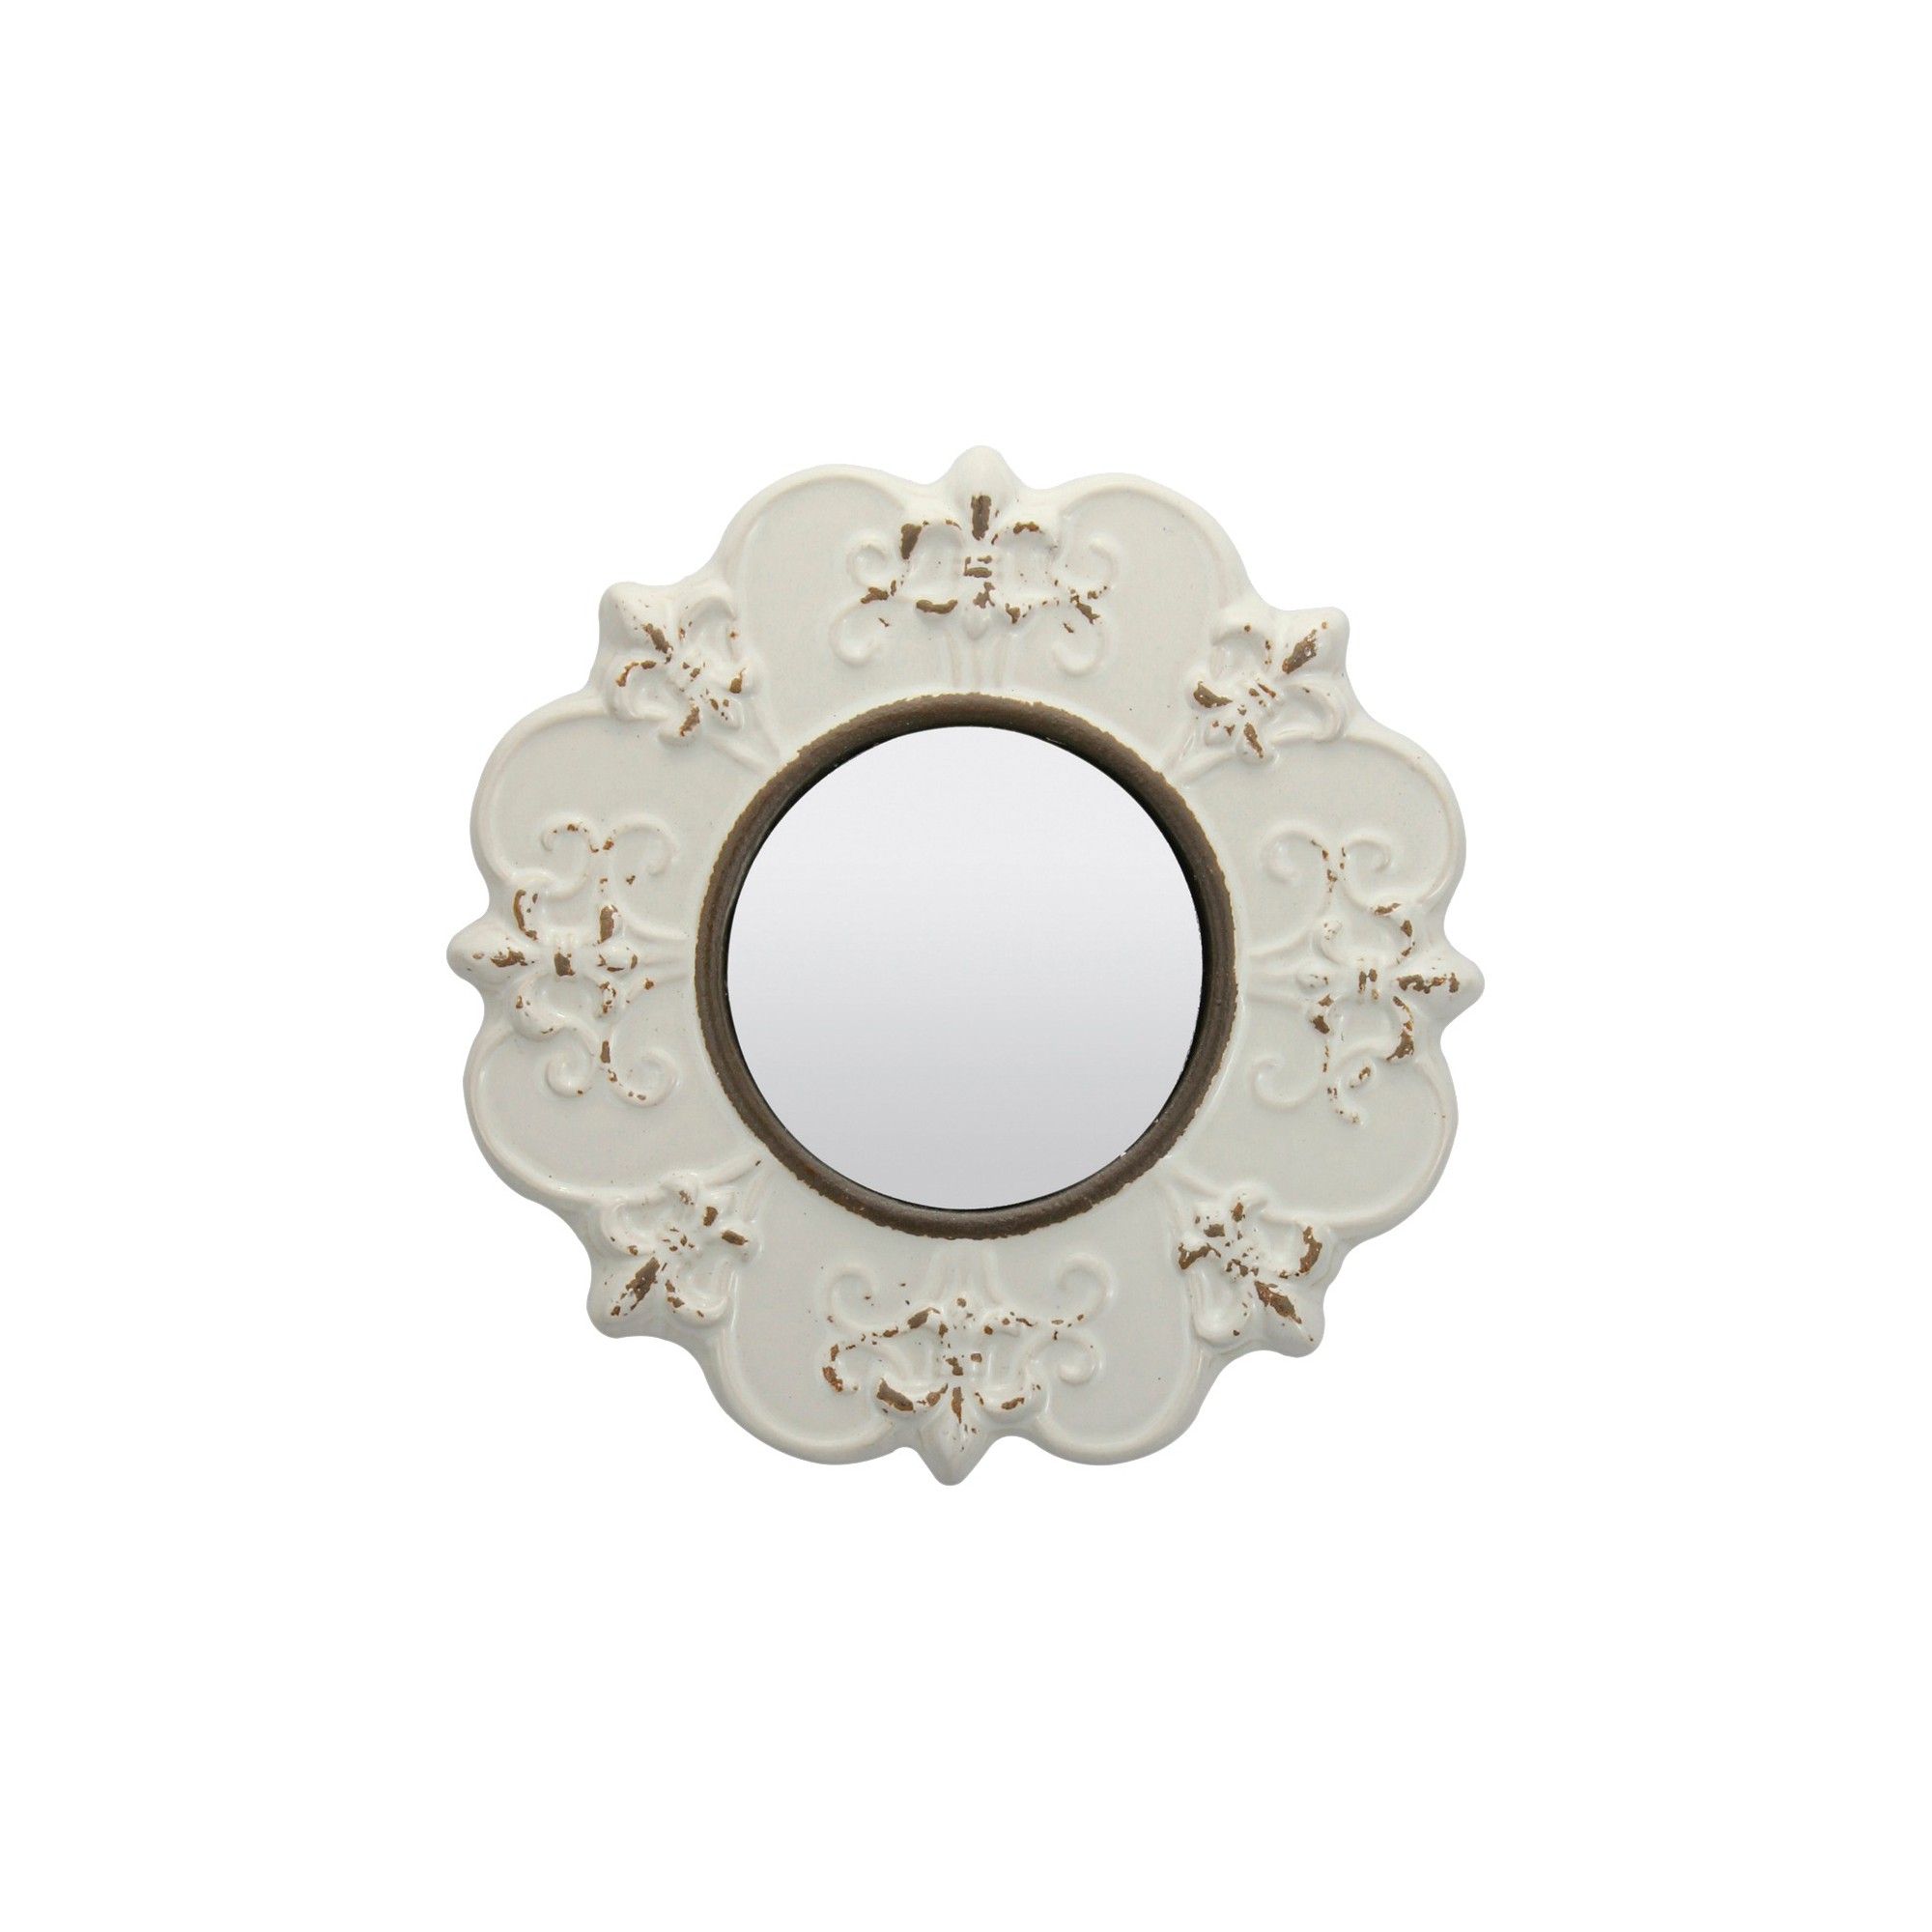 Newest Round Decorative Wall Mirror Off White – Ckk Home Decor Within Small Round Decorative Wall Mirrors (View 12 of 20)